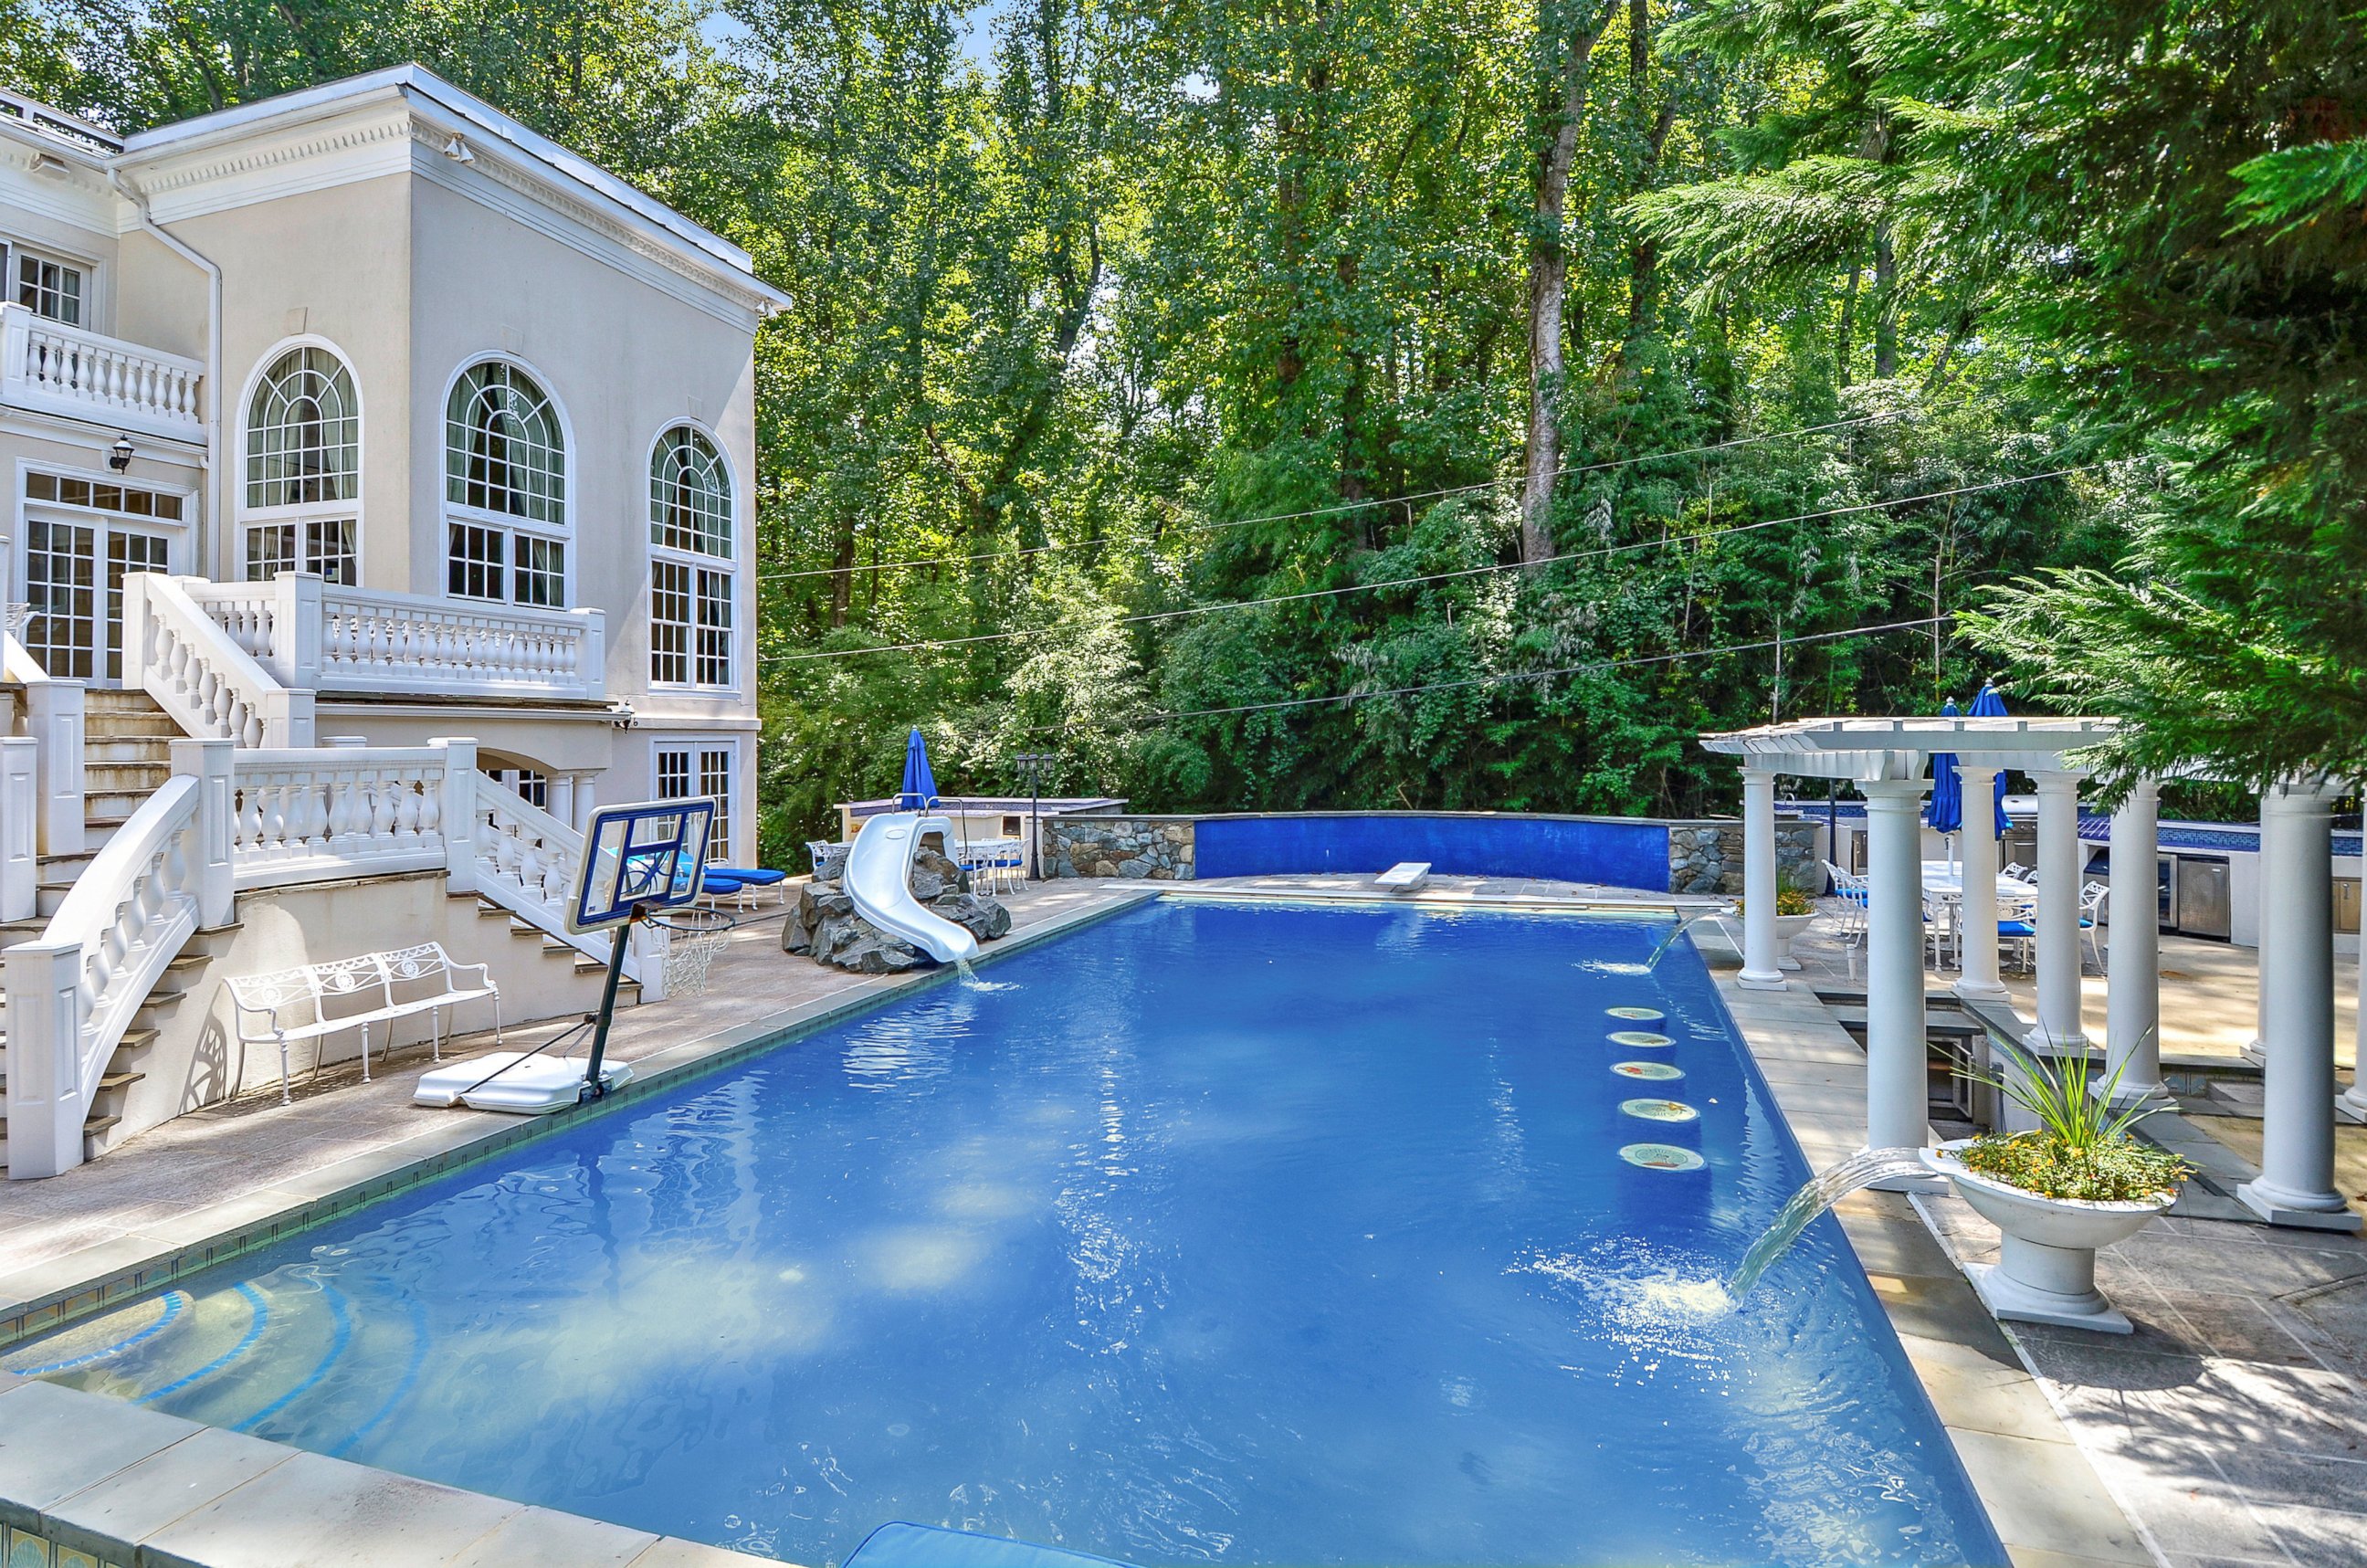 PHOTO: Online bidding for this 12,500 square feet White House replica in McLean, VA begins at $2 million.